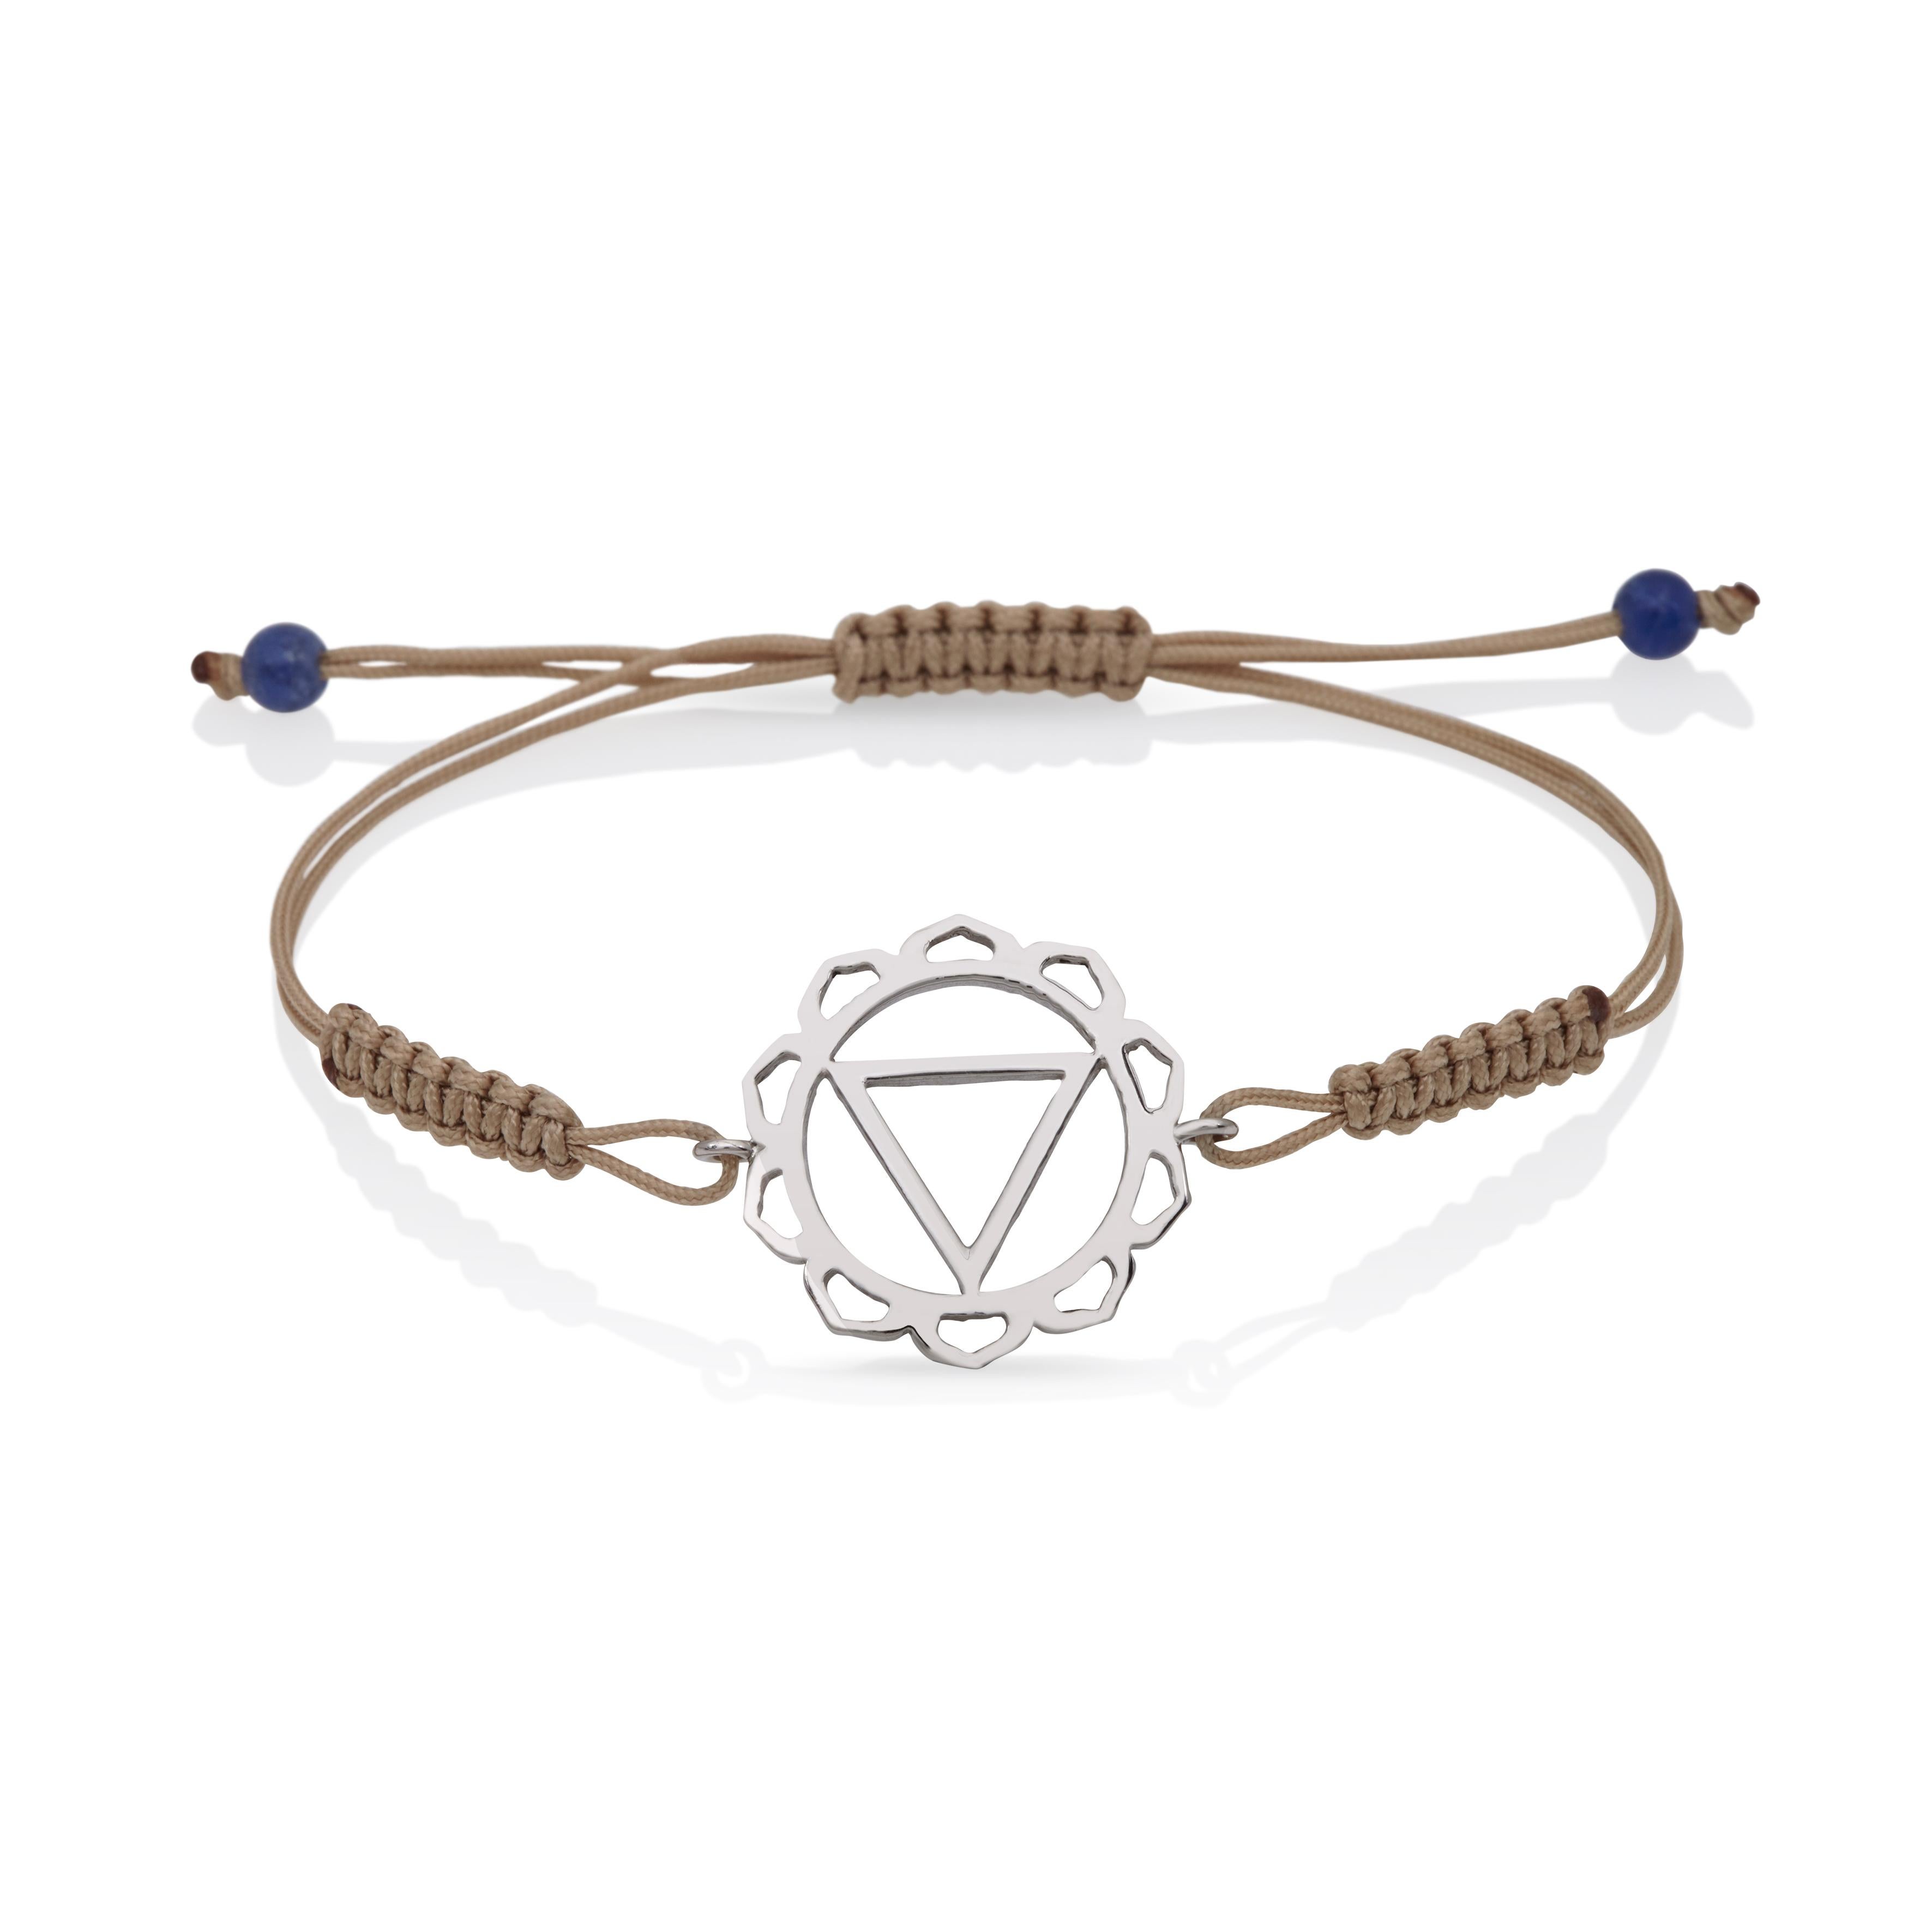 Macrame Yoga Bracelet with  Manipura,the Solar Plexus Chakra in 14Kt White Gold with Brown Cord and Lapiz lazuli beads
A very beautiful and wearable macrame bracelet made of 14Kt Gold with the Manipura - Solar Plexus Chakra. It will match with